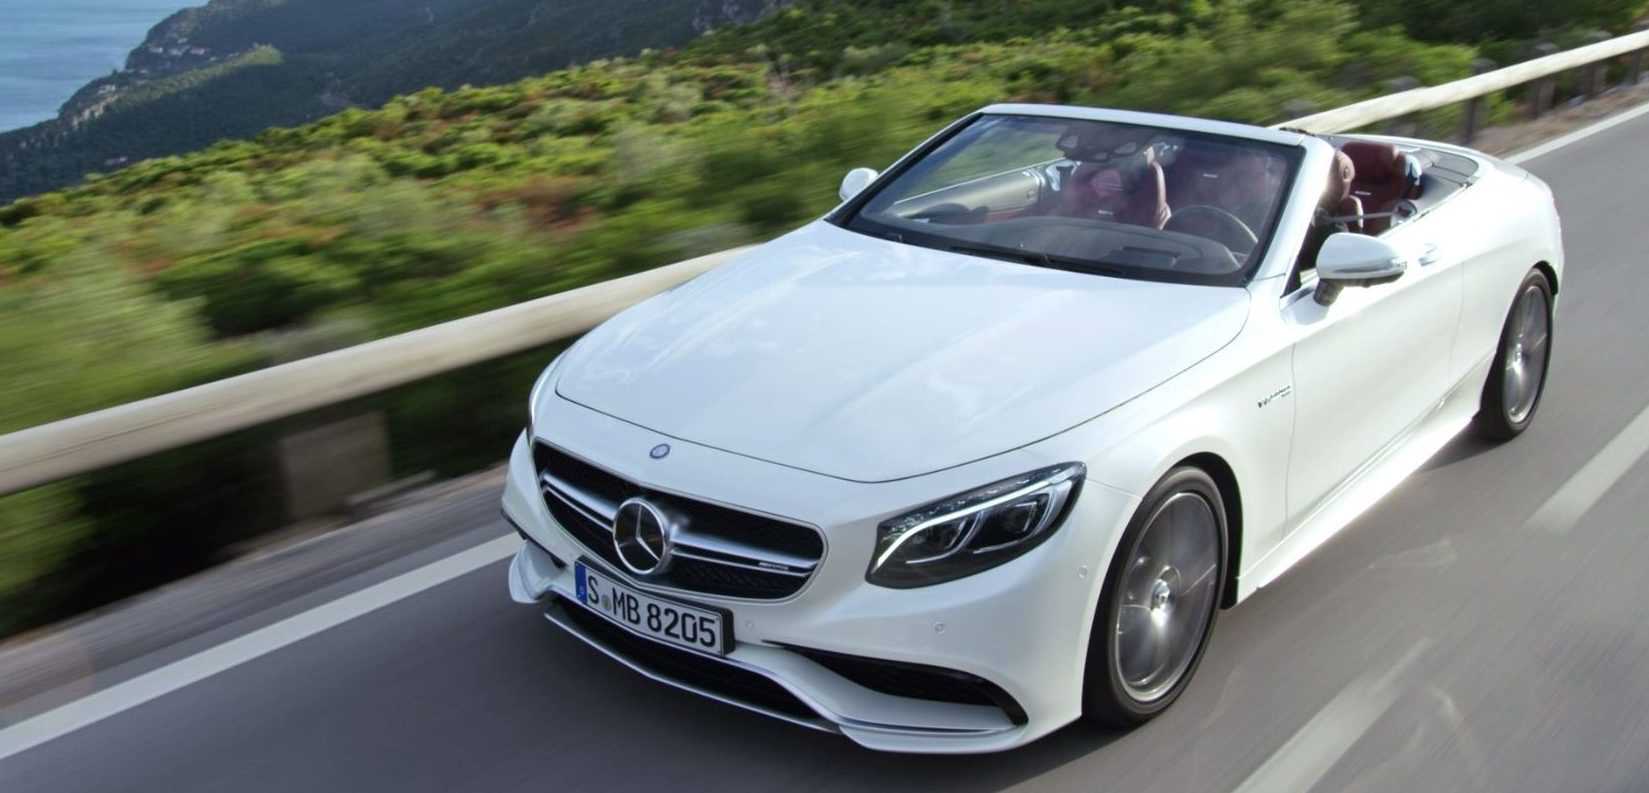 Mercedes-AMG S 63 4Matic Cabriolet 2016